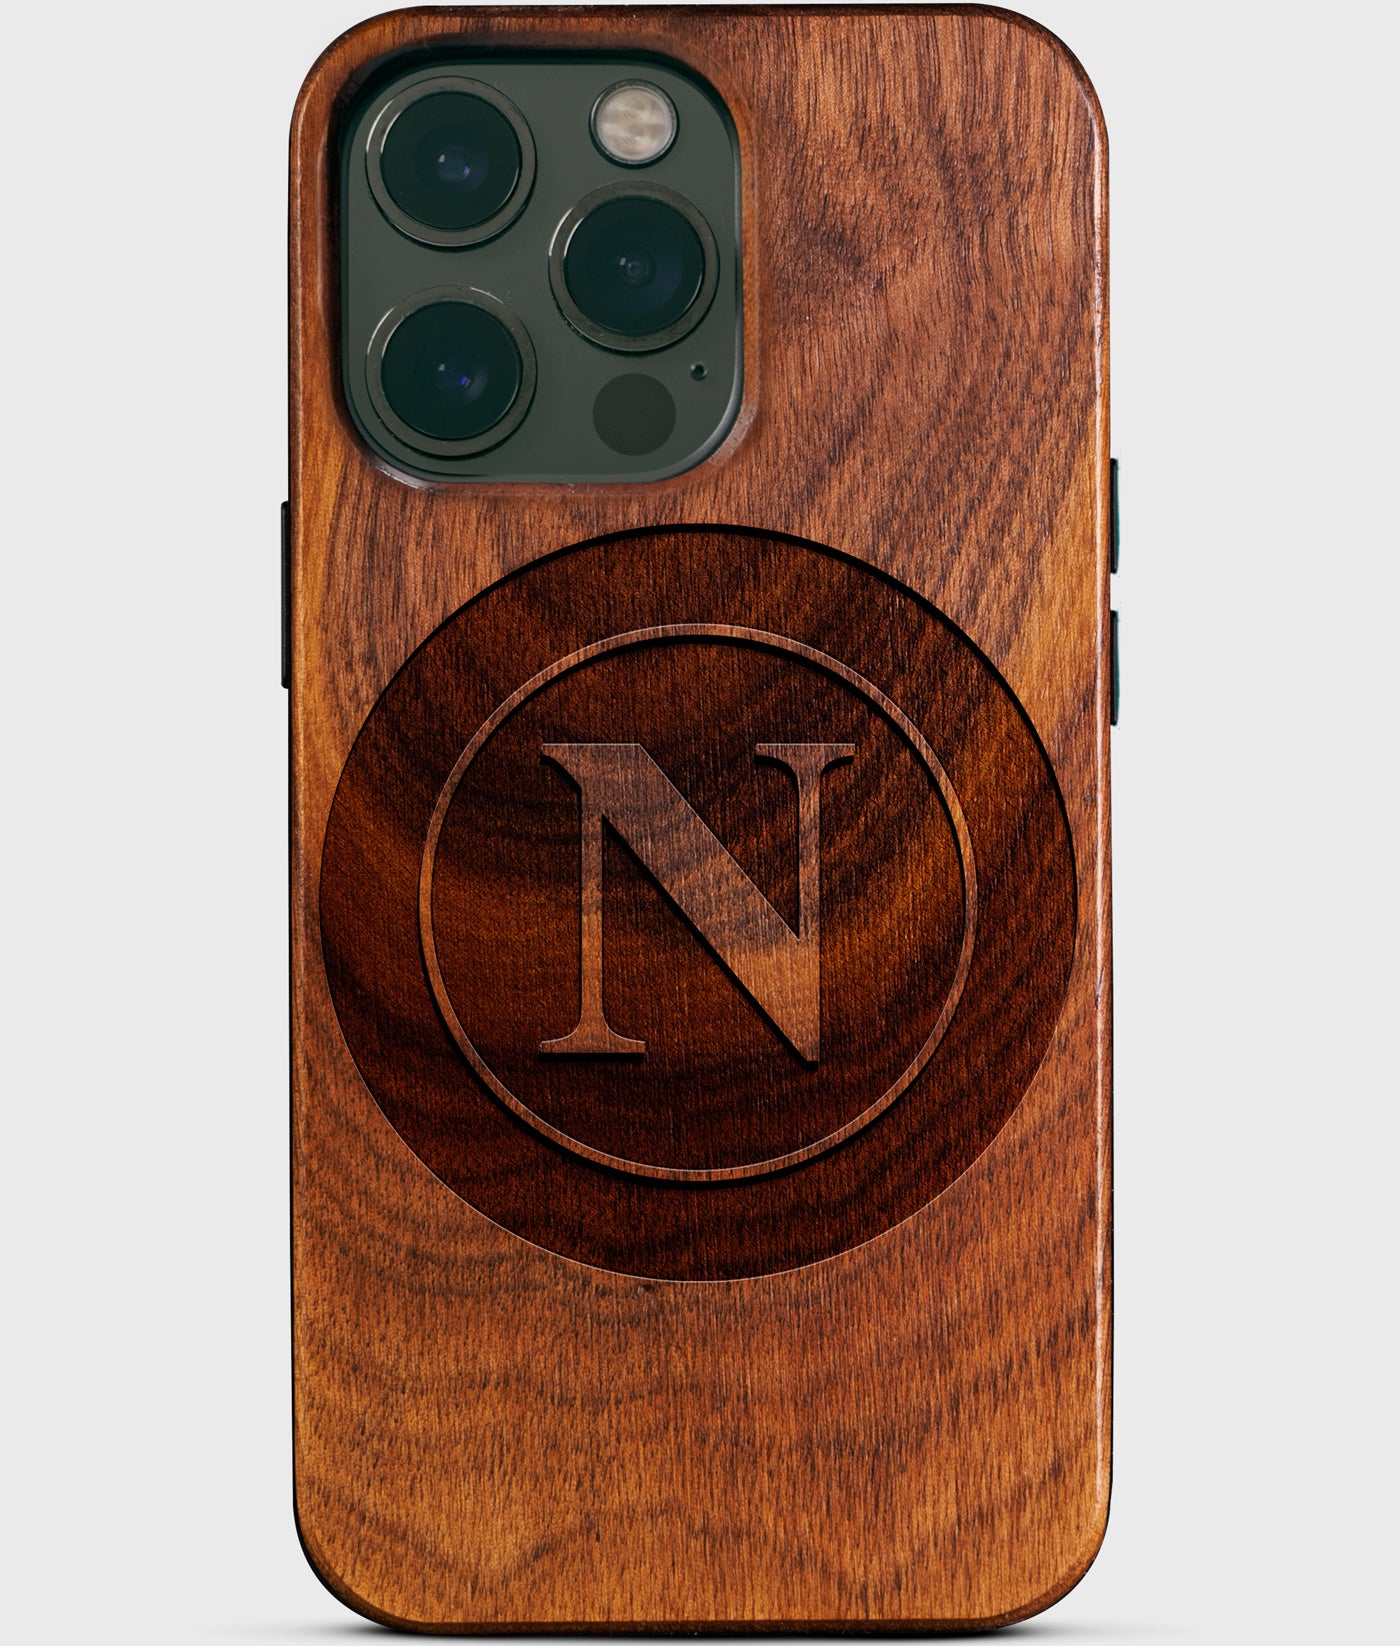 Custom SSC Napoli iPhone 14 Pro Max Cases - SSC Napoli Personalized iPhone 14 Pro Max Cover - Italian Football Club SSC Napoli Gifts For Men 2022 Best SSC Napoli Christmas Gifts Wood Unique Sportiva Calcio Napoli Gift For Him Monogrammed